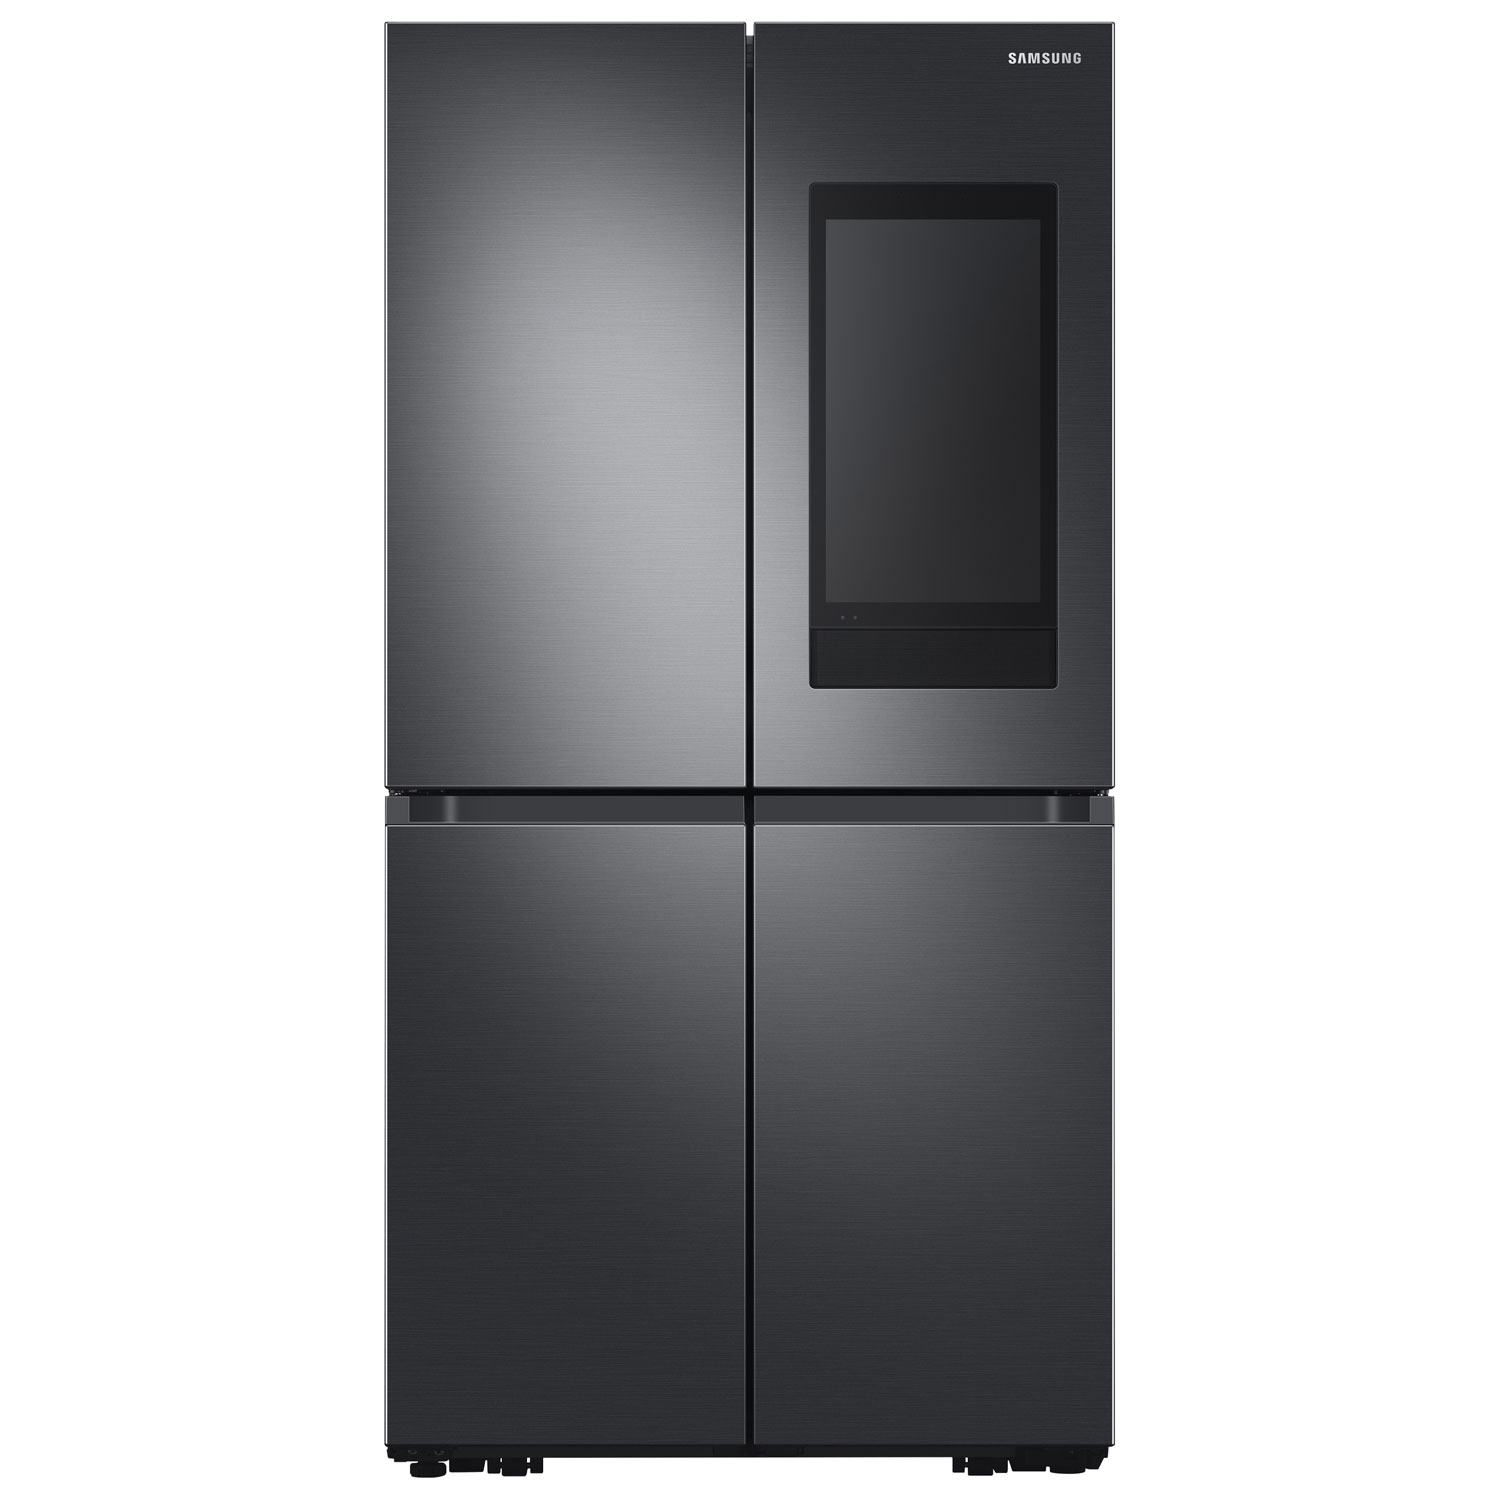 Samsung Family Hub 36" 22.8 Cu. Ft. French Door Refrigerator (RF23A9771SG) - Black Stainless